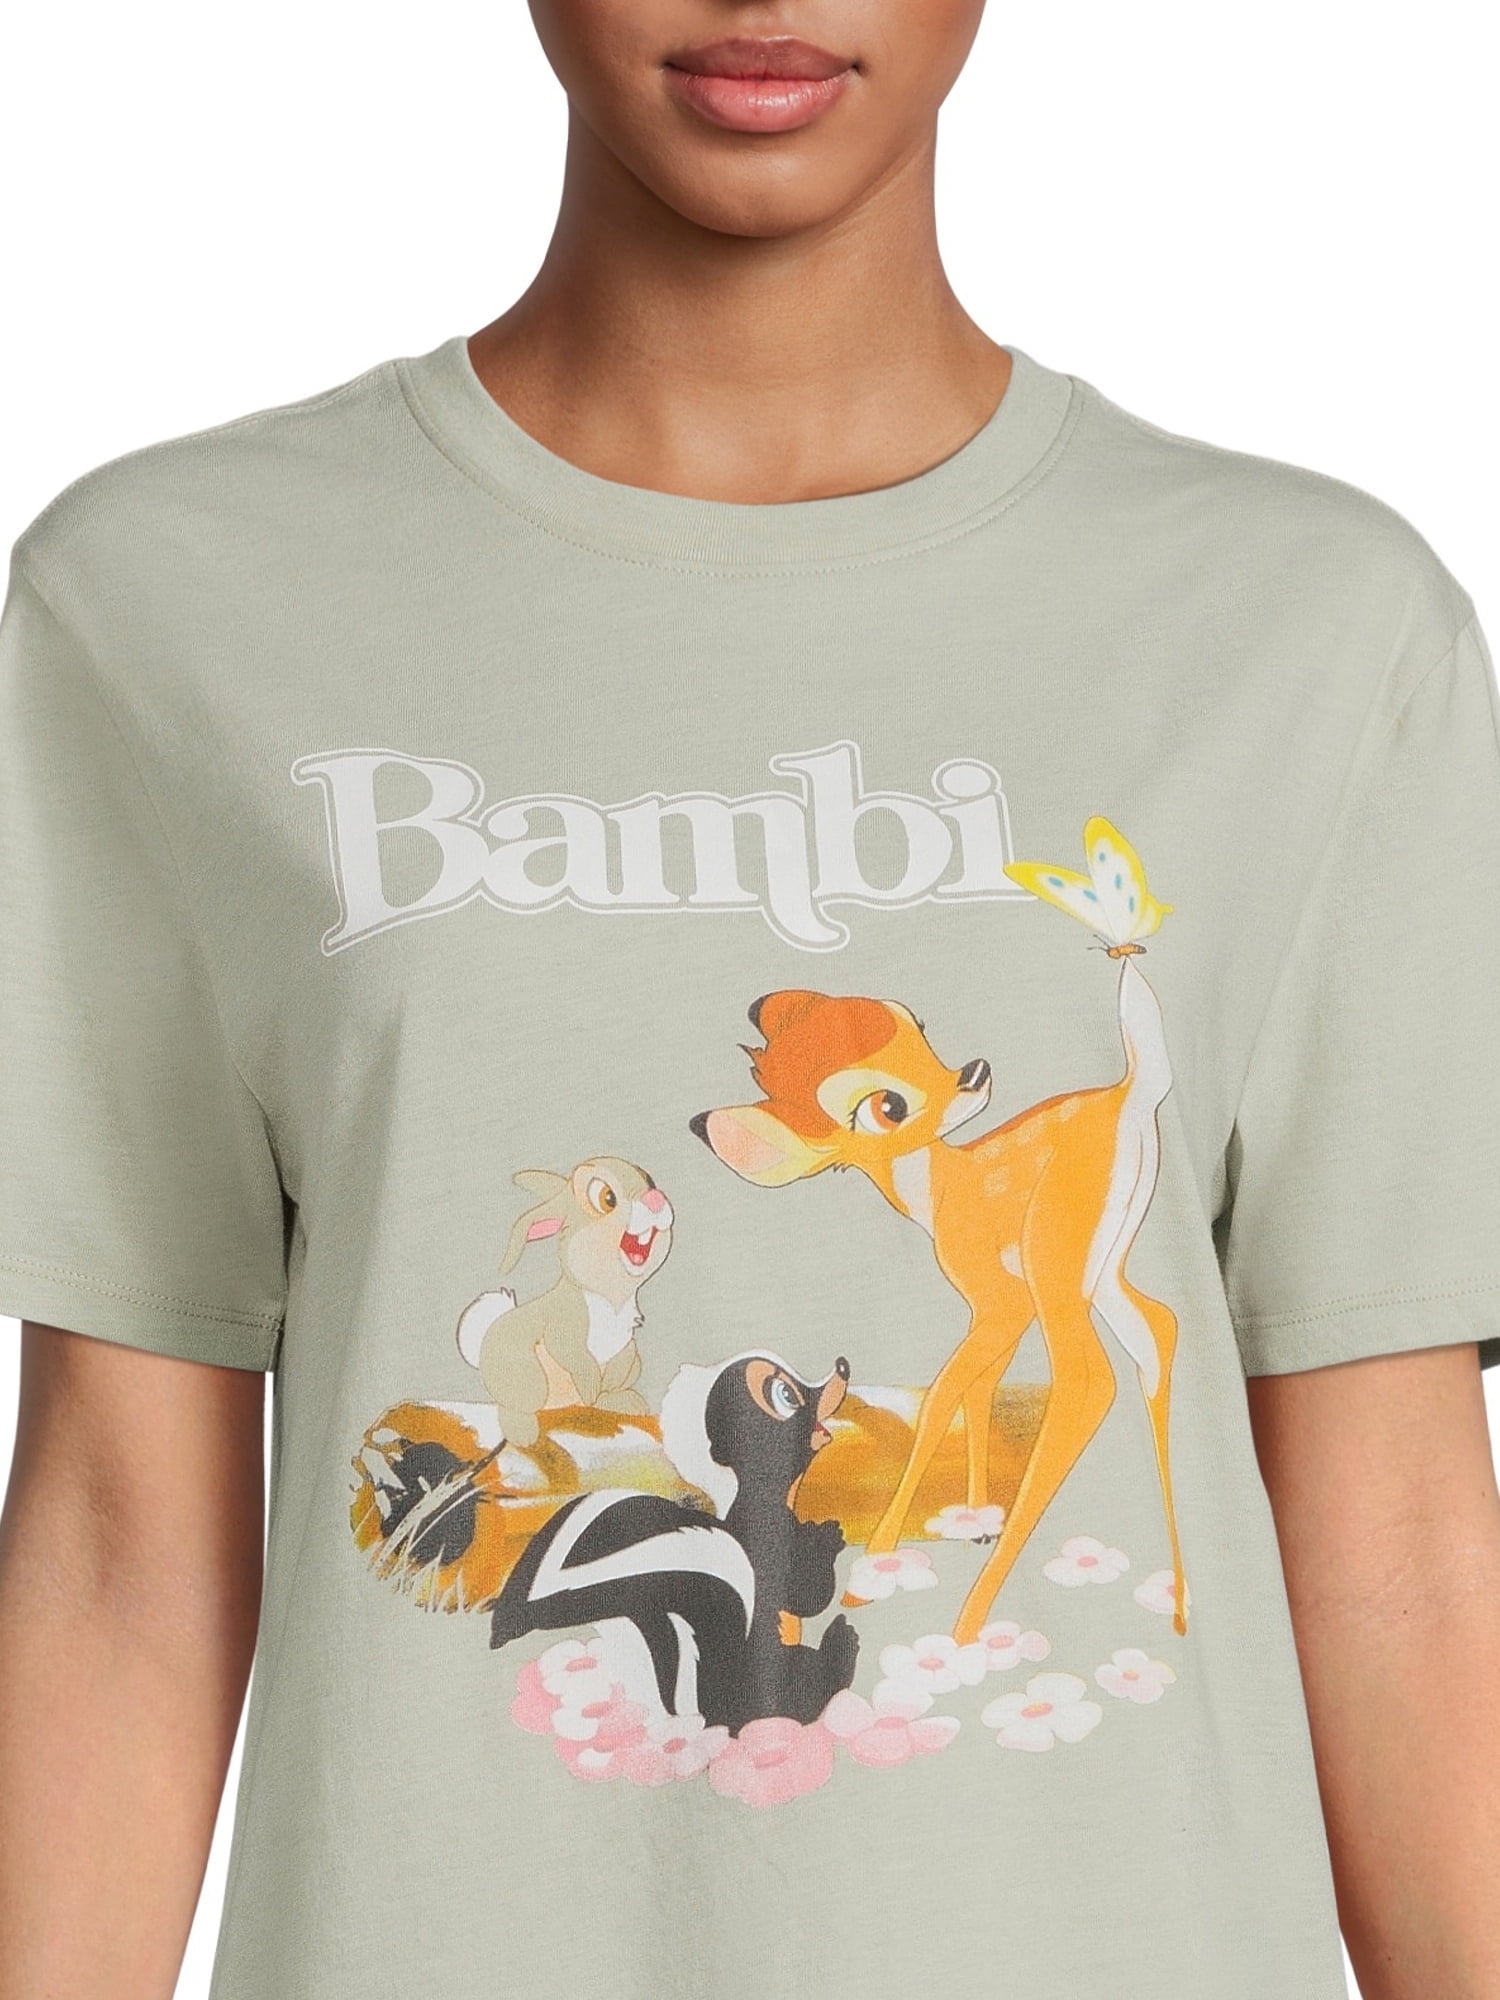 Bambi Juniors Graphic T-Shirt with Short Sleeves